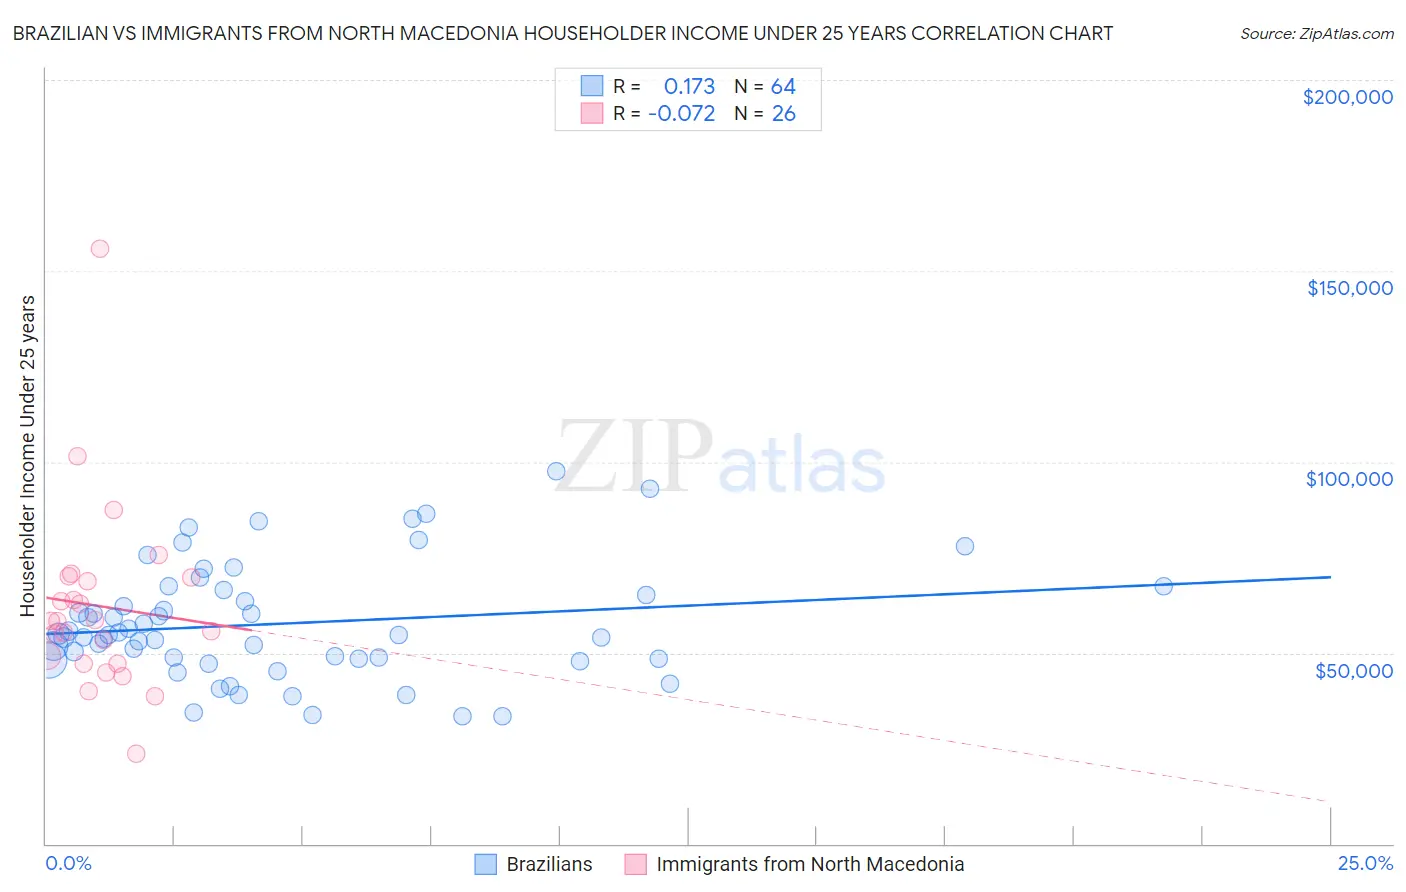 Brazilian vs Immigrants from North Macedonia Householder Income Under 25 years